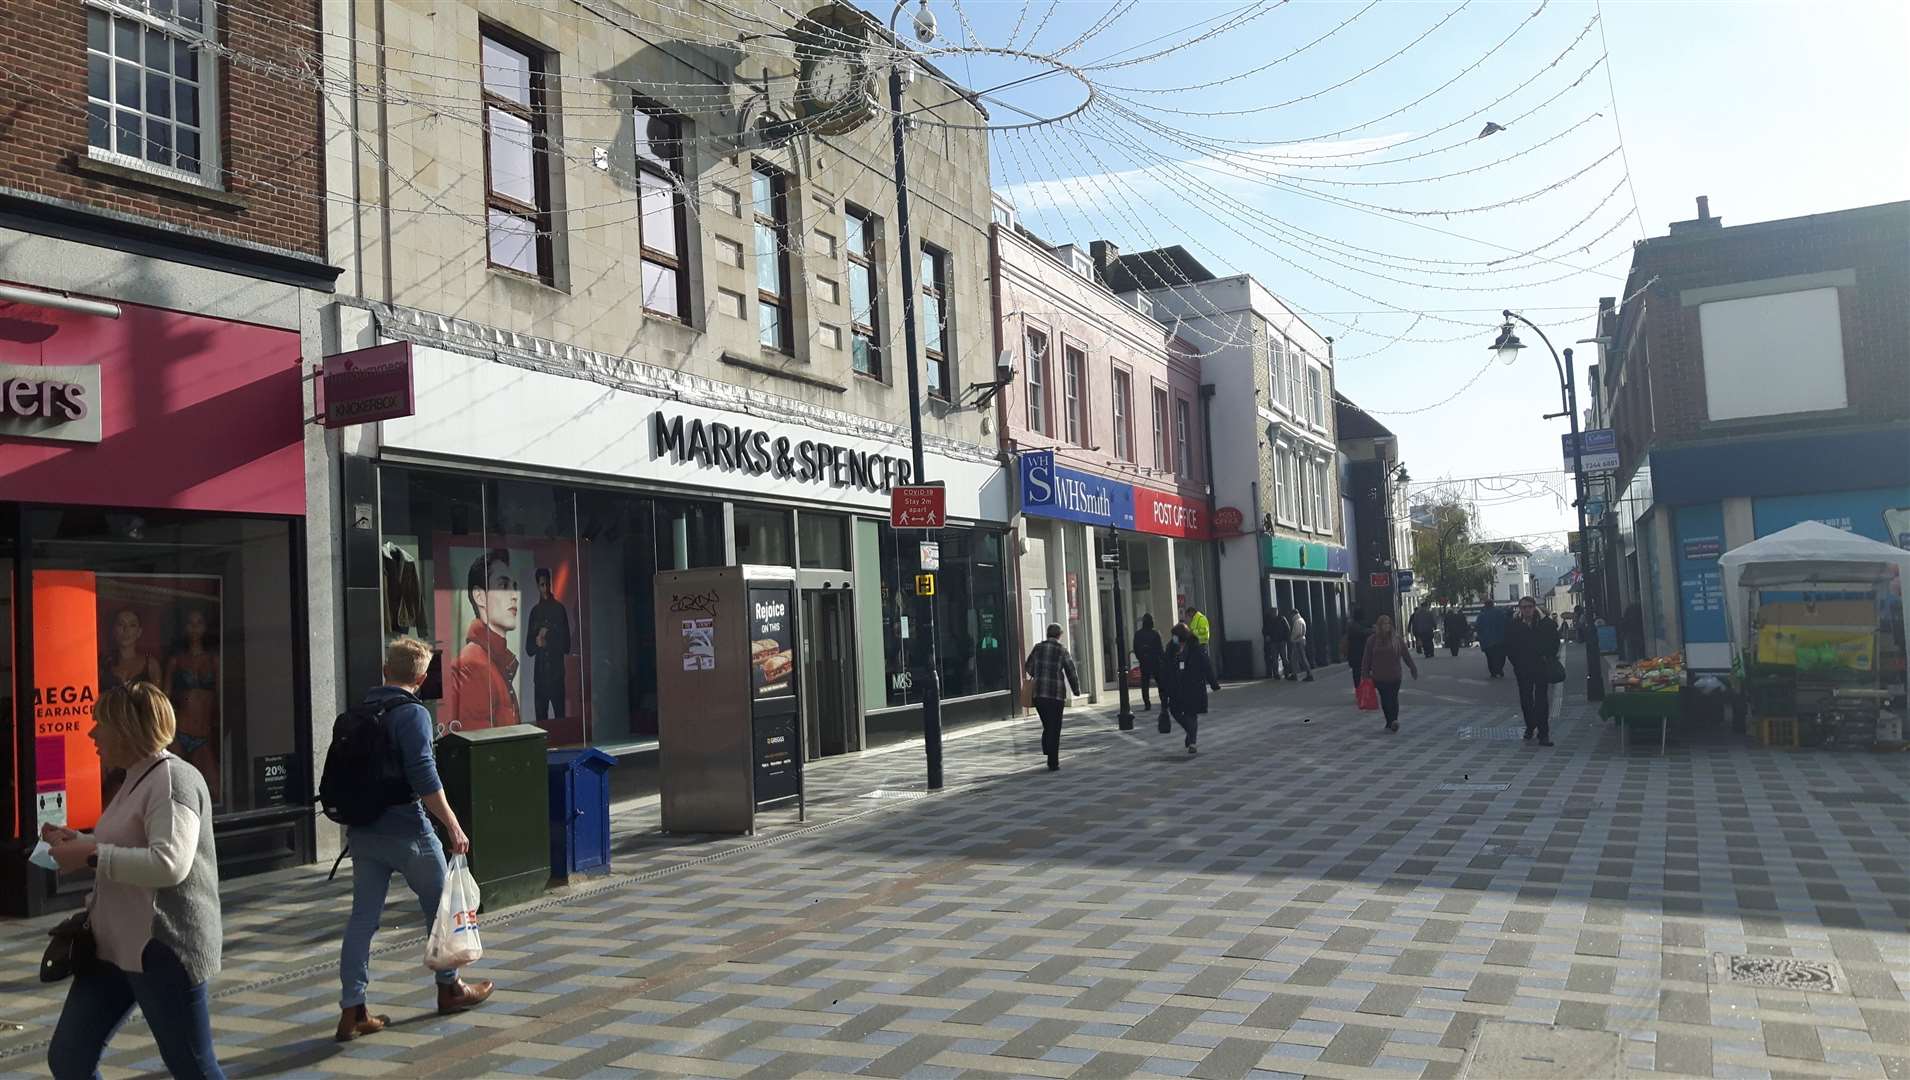 Money will be spent on street furniture and "greening" the town centre